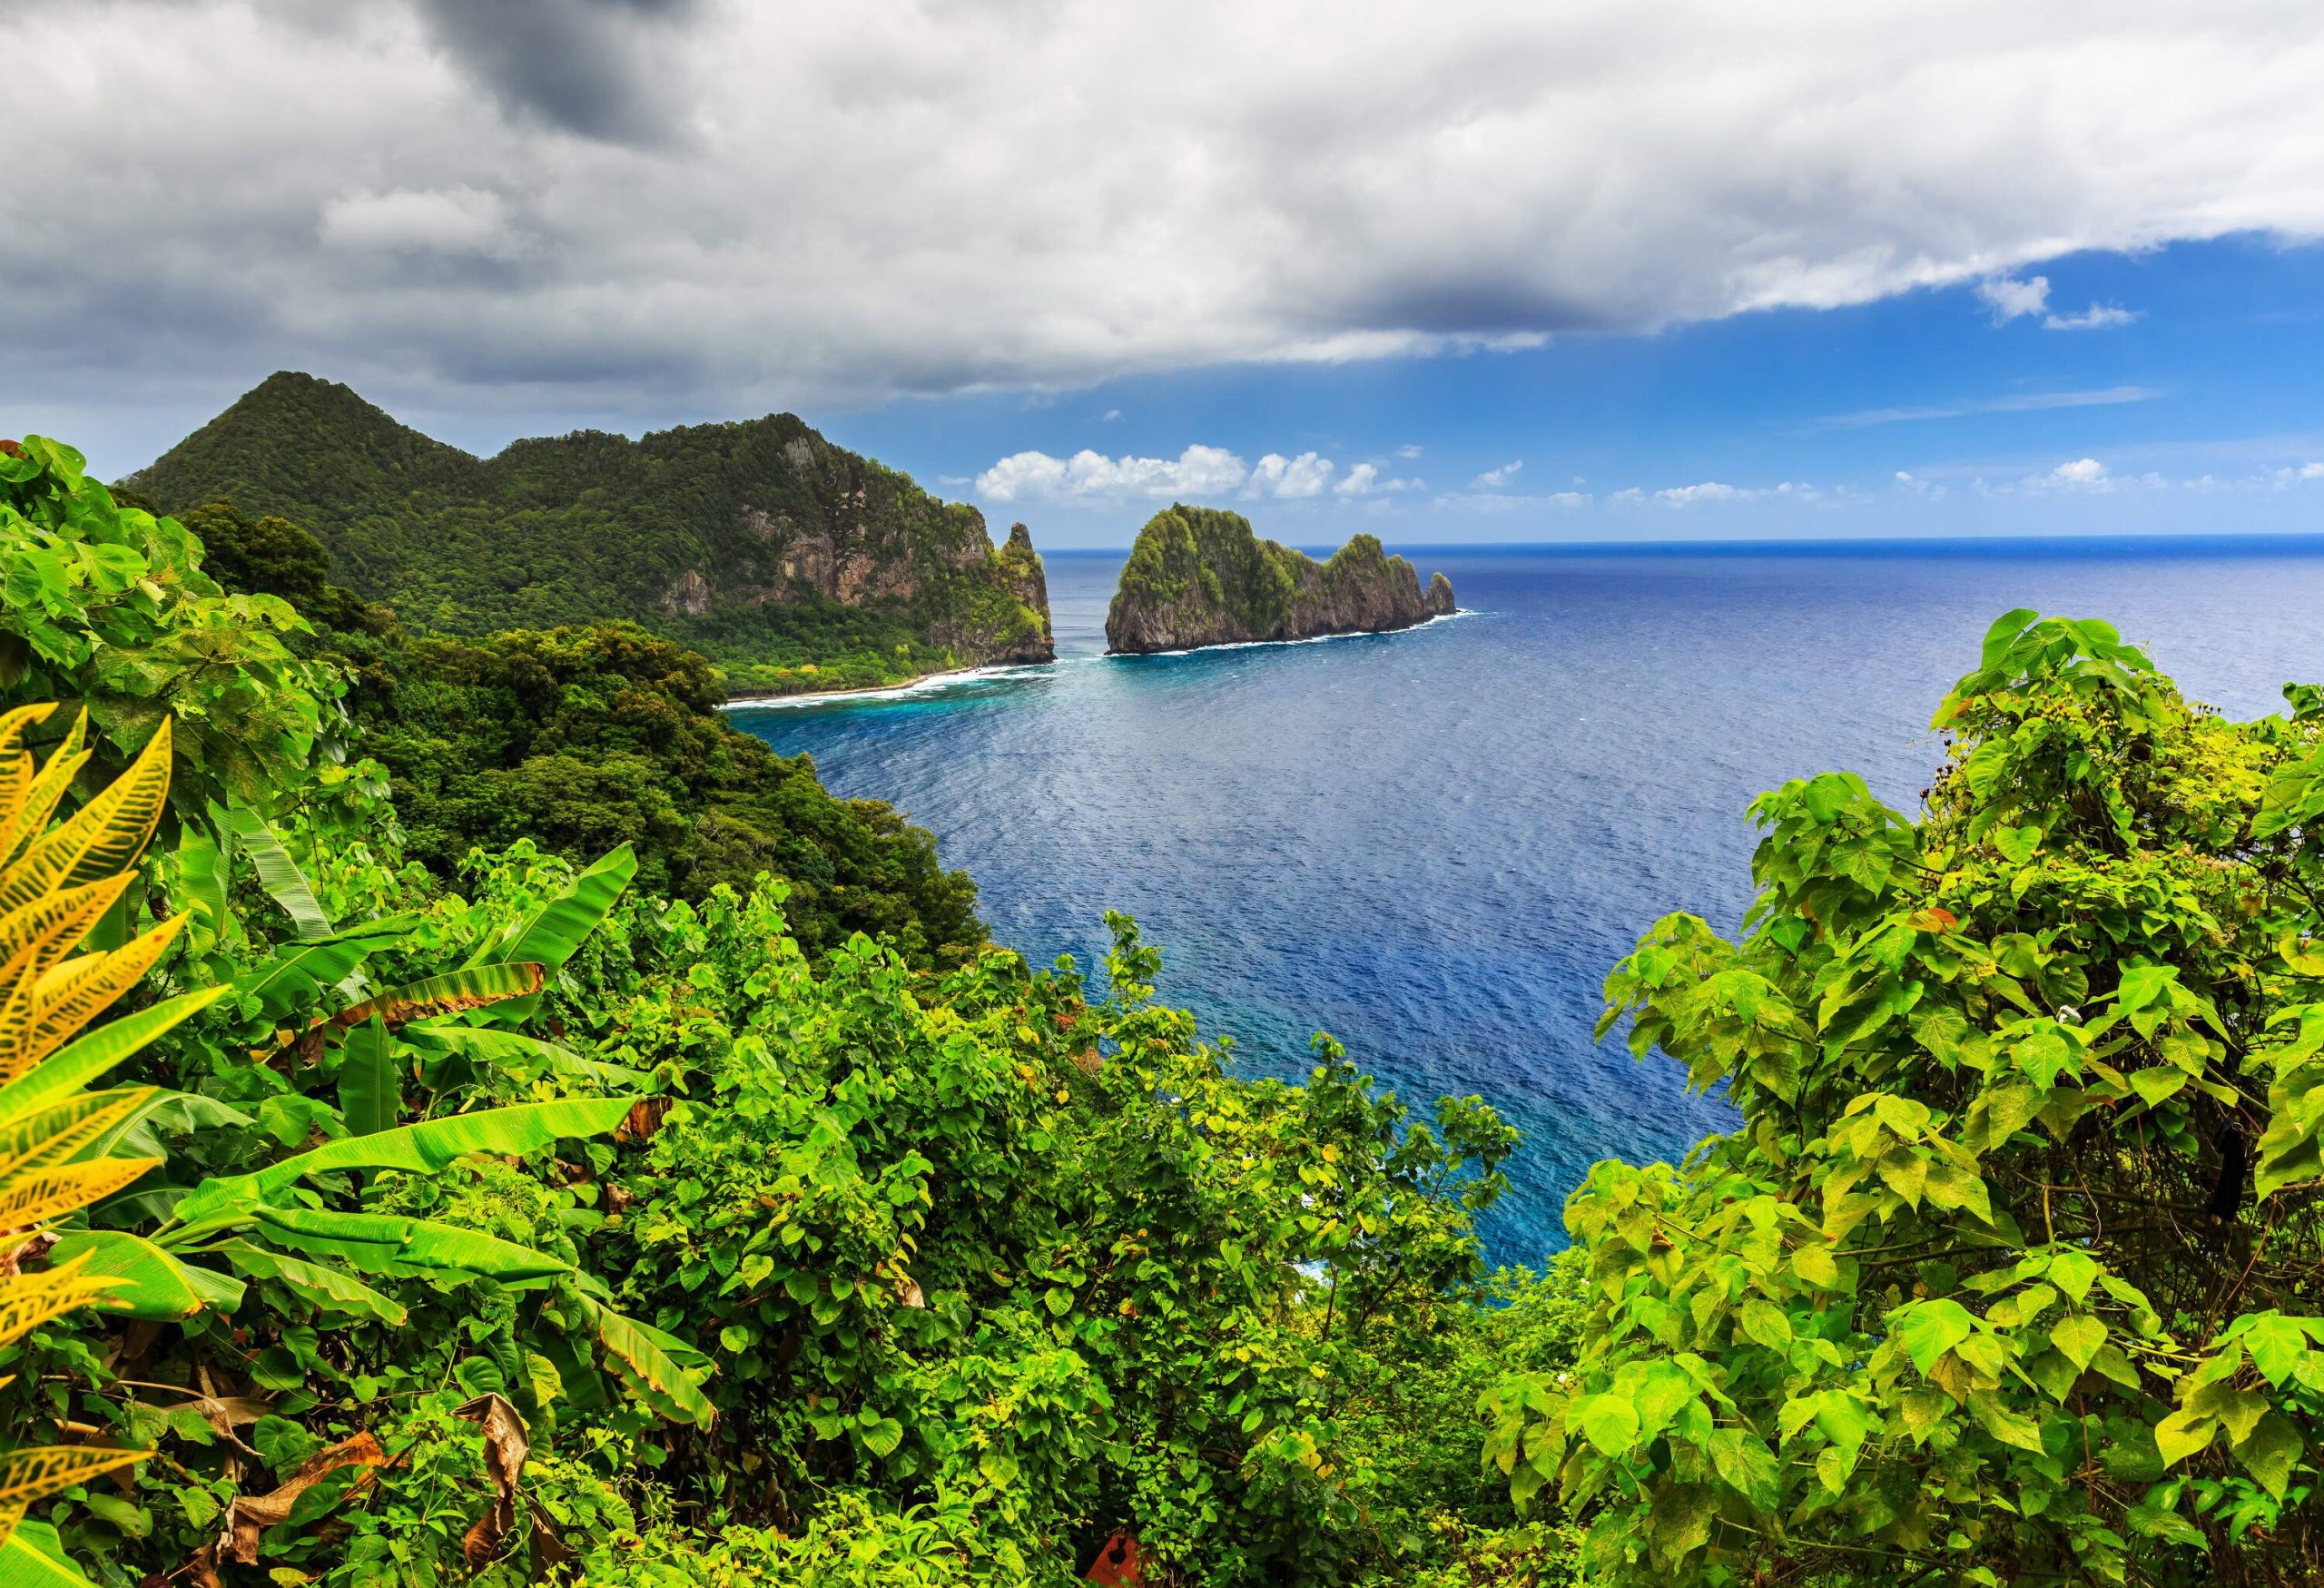 A verdant rocky island surrounded by the blue sea against the cloudy blue sky.